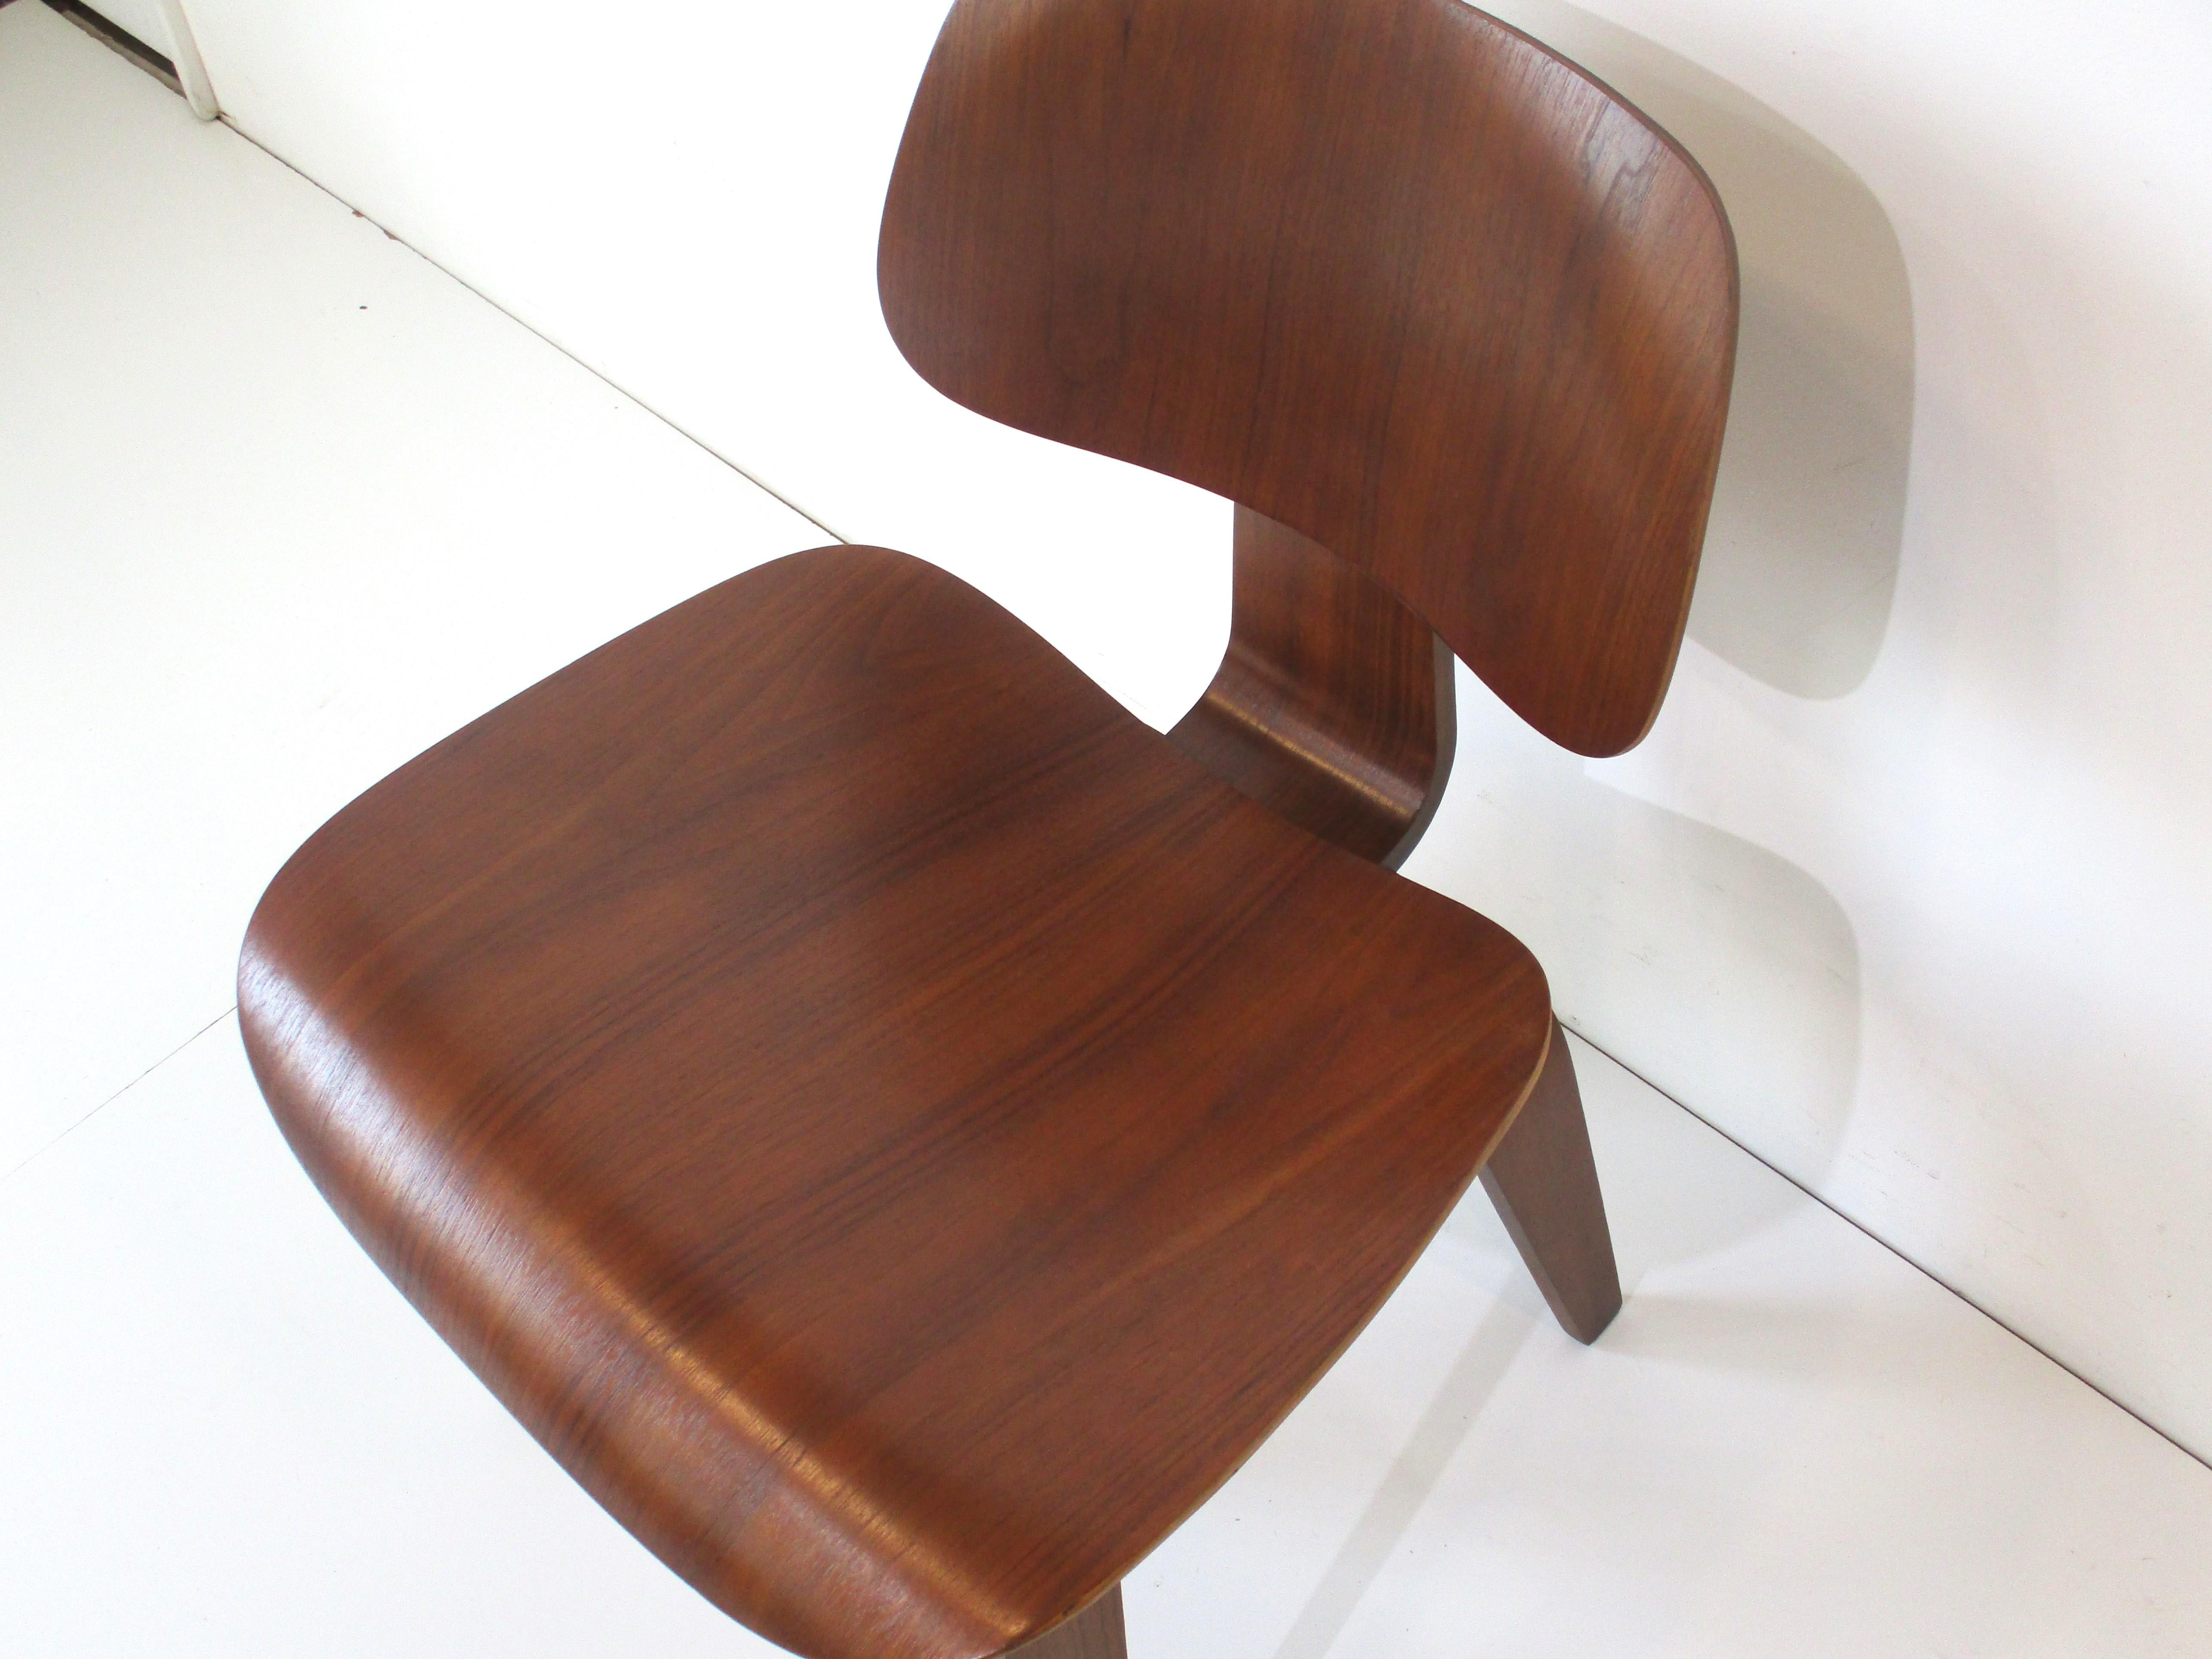 A early Eames DCW side chair in finely grained bent walnut ply from the iconic team of Ray and Charles Eames. Built after WW2 using techniques developed during war production and switching to household items. This was the chair that made the